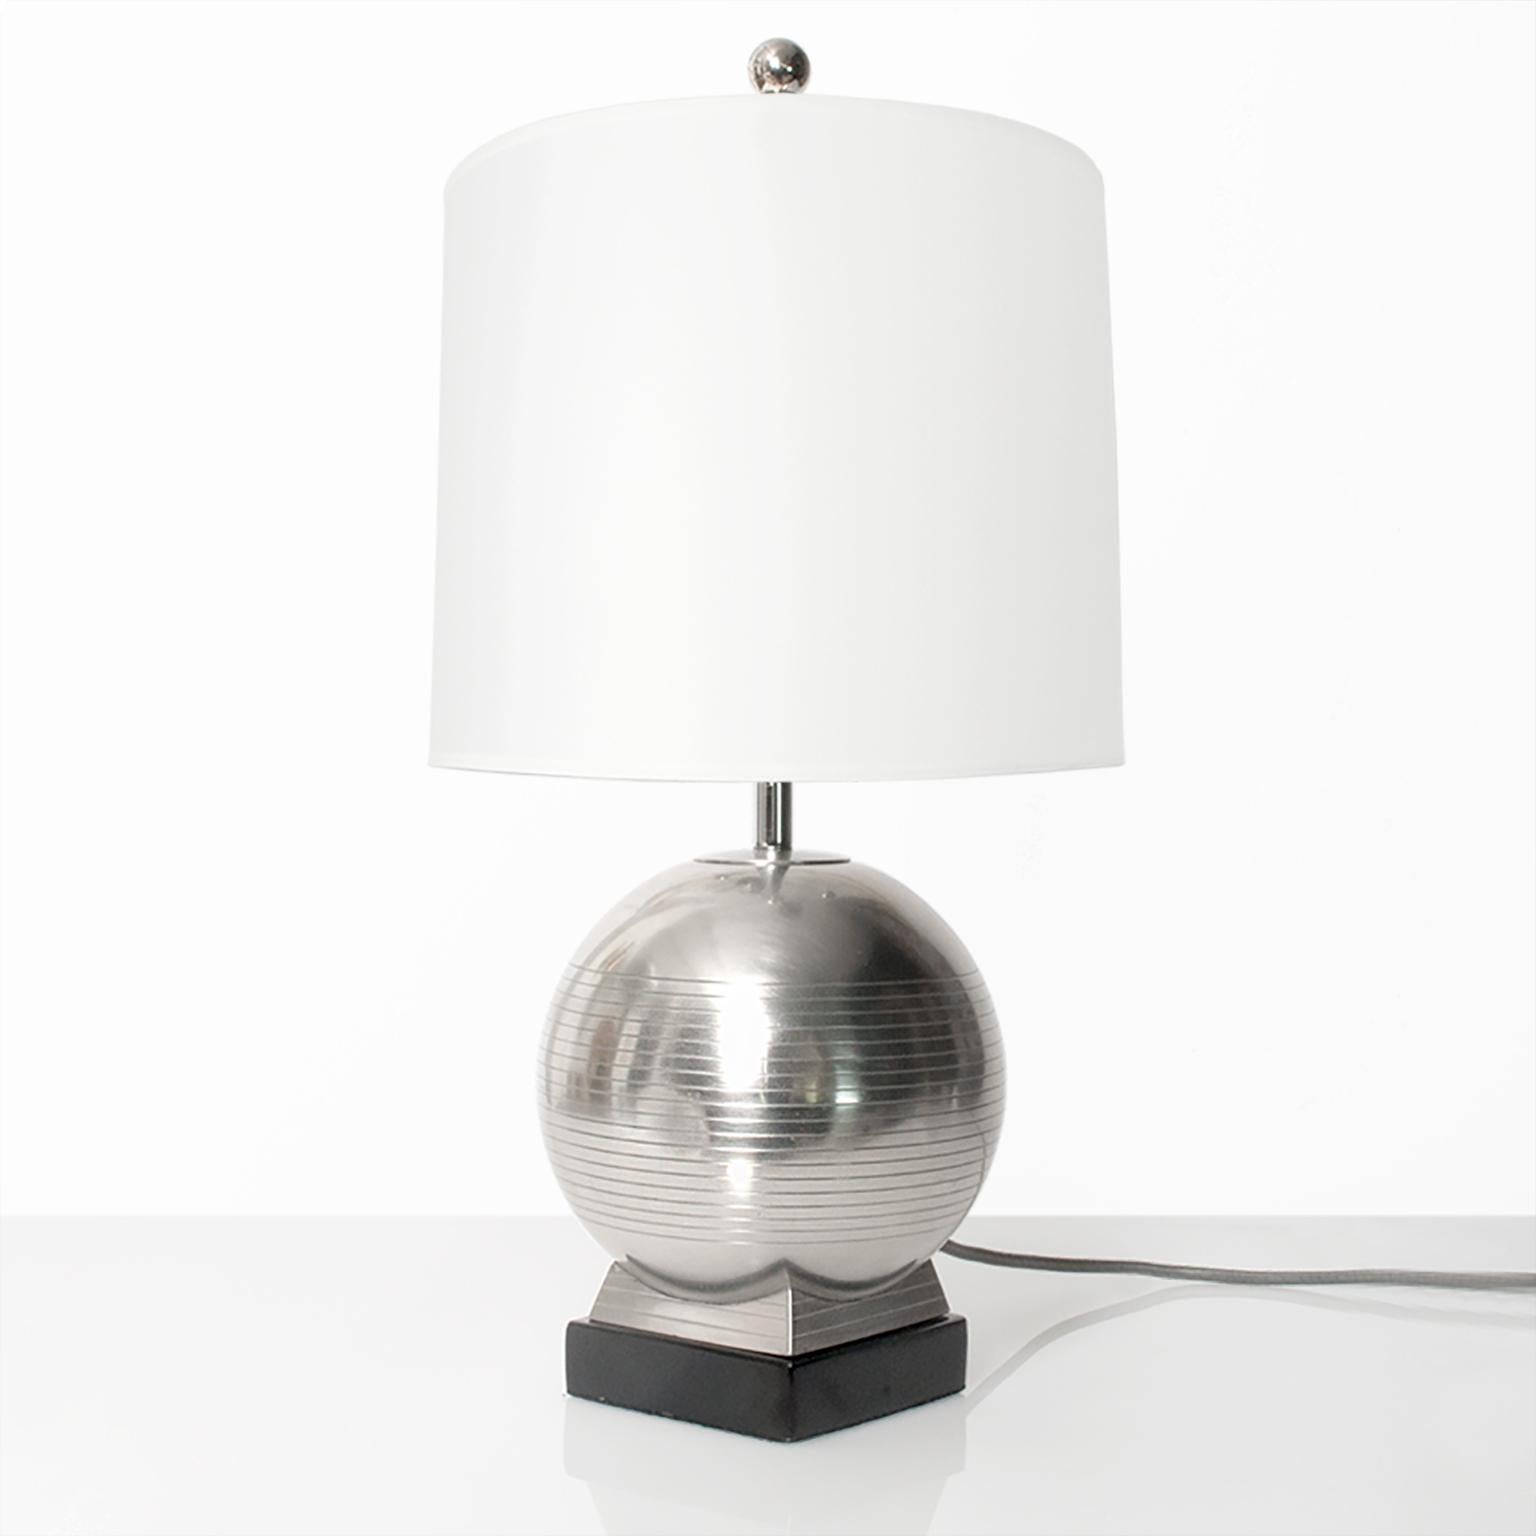 A Scandinavian modern spherical pewter table lamp on a lacquered wood plinth detailed with a series of horizontal groves. Made by G.A.B. (Guldsmedsaktiebolaget), circa 1930s. Newly polished, lacquered and rewired for the USA with a nickel-plated